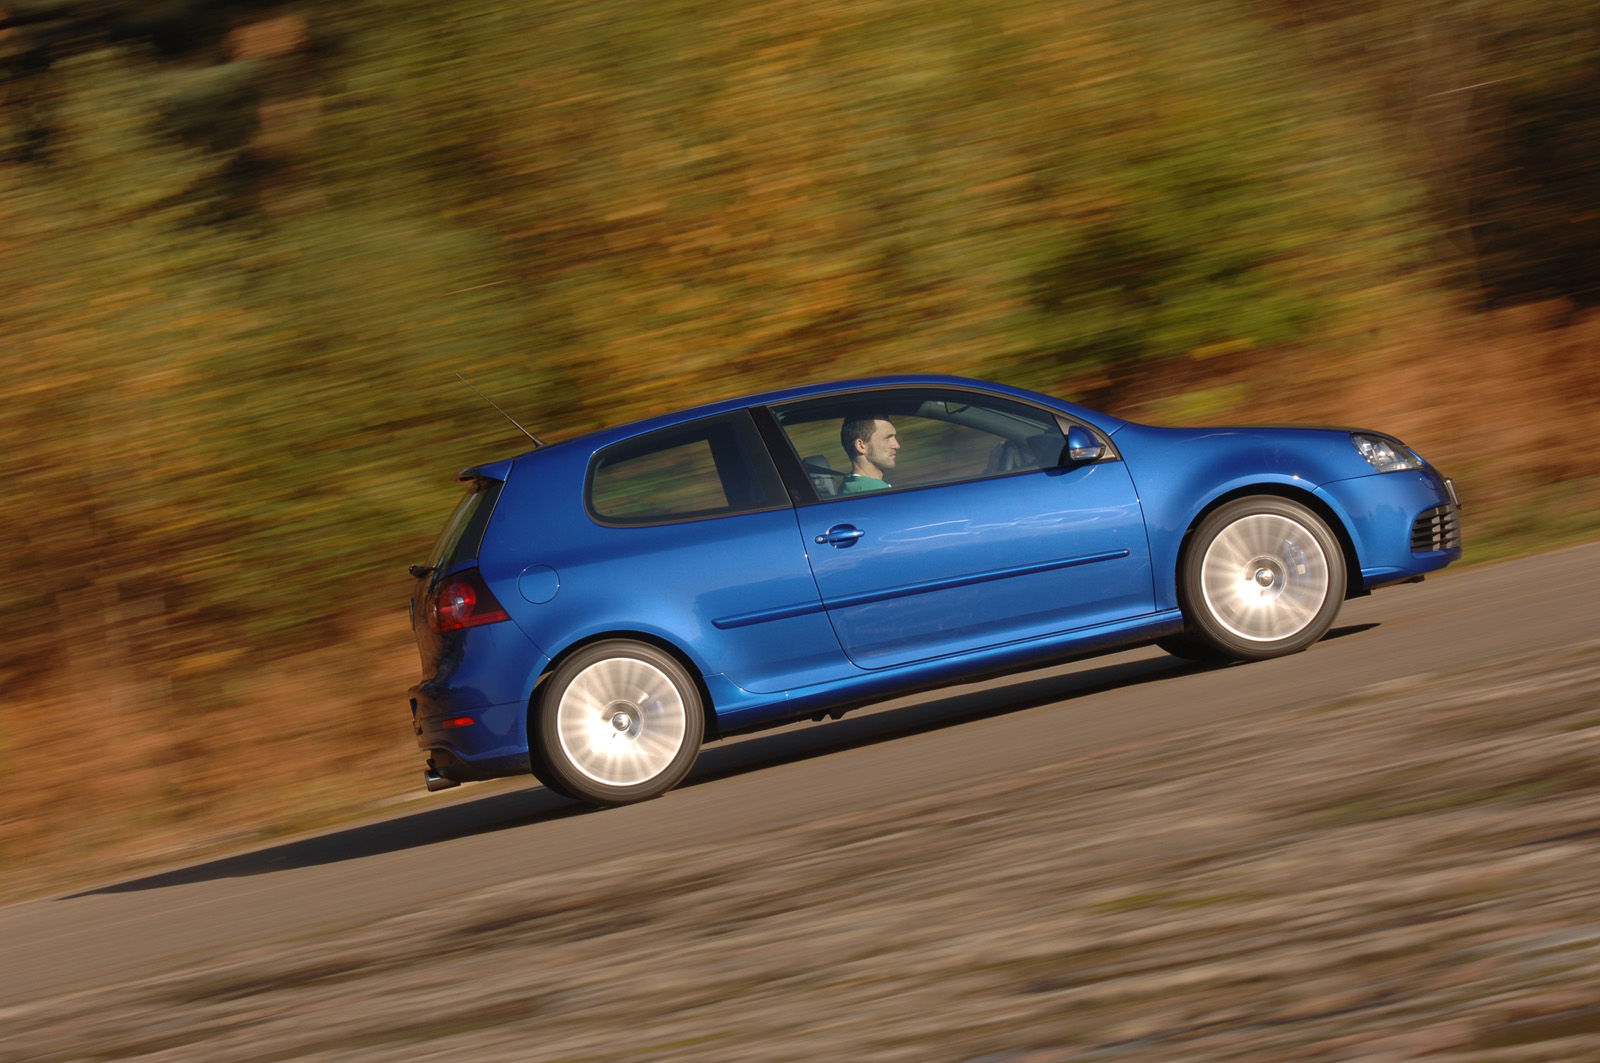 Volkswagen Golf (Mk4) R32 - review, history and used buying guide